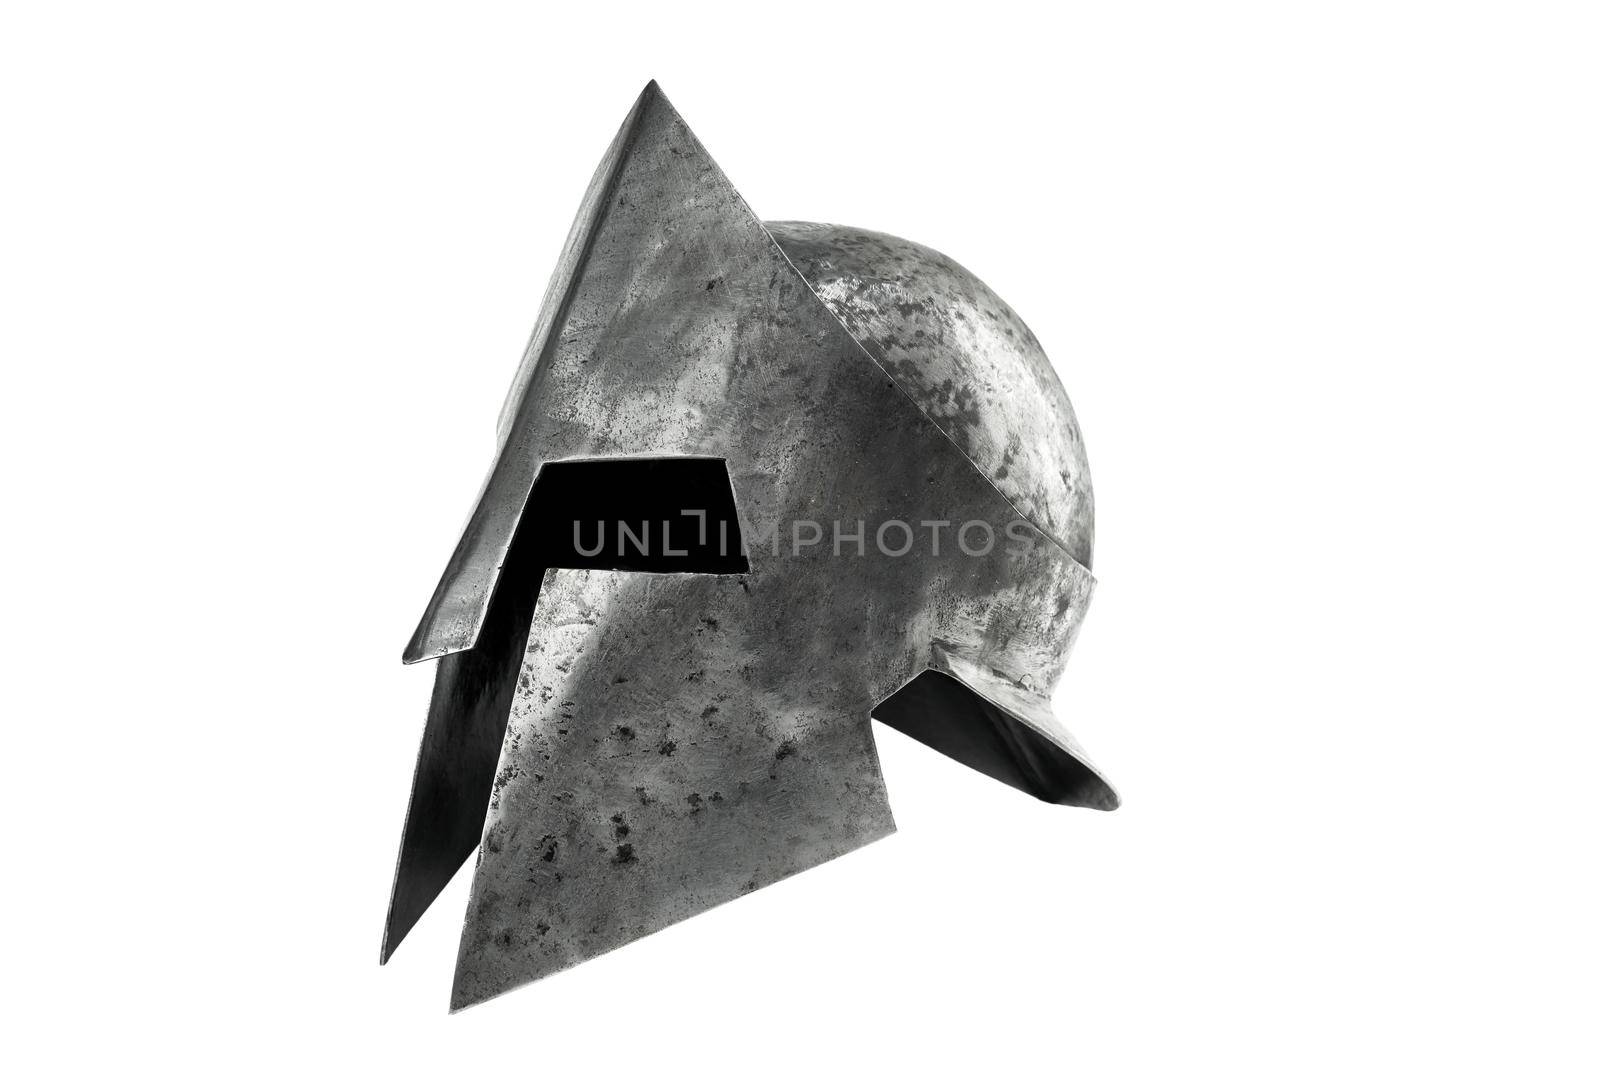 Antique iron spartan helmet isolated on white. by SerhiiBobyk